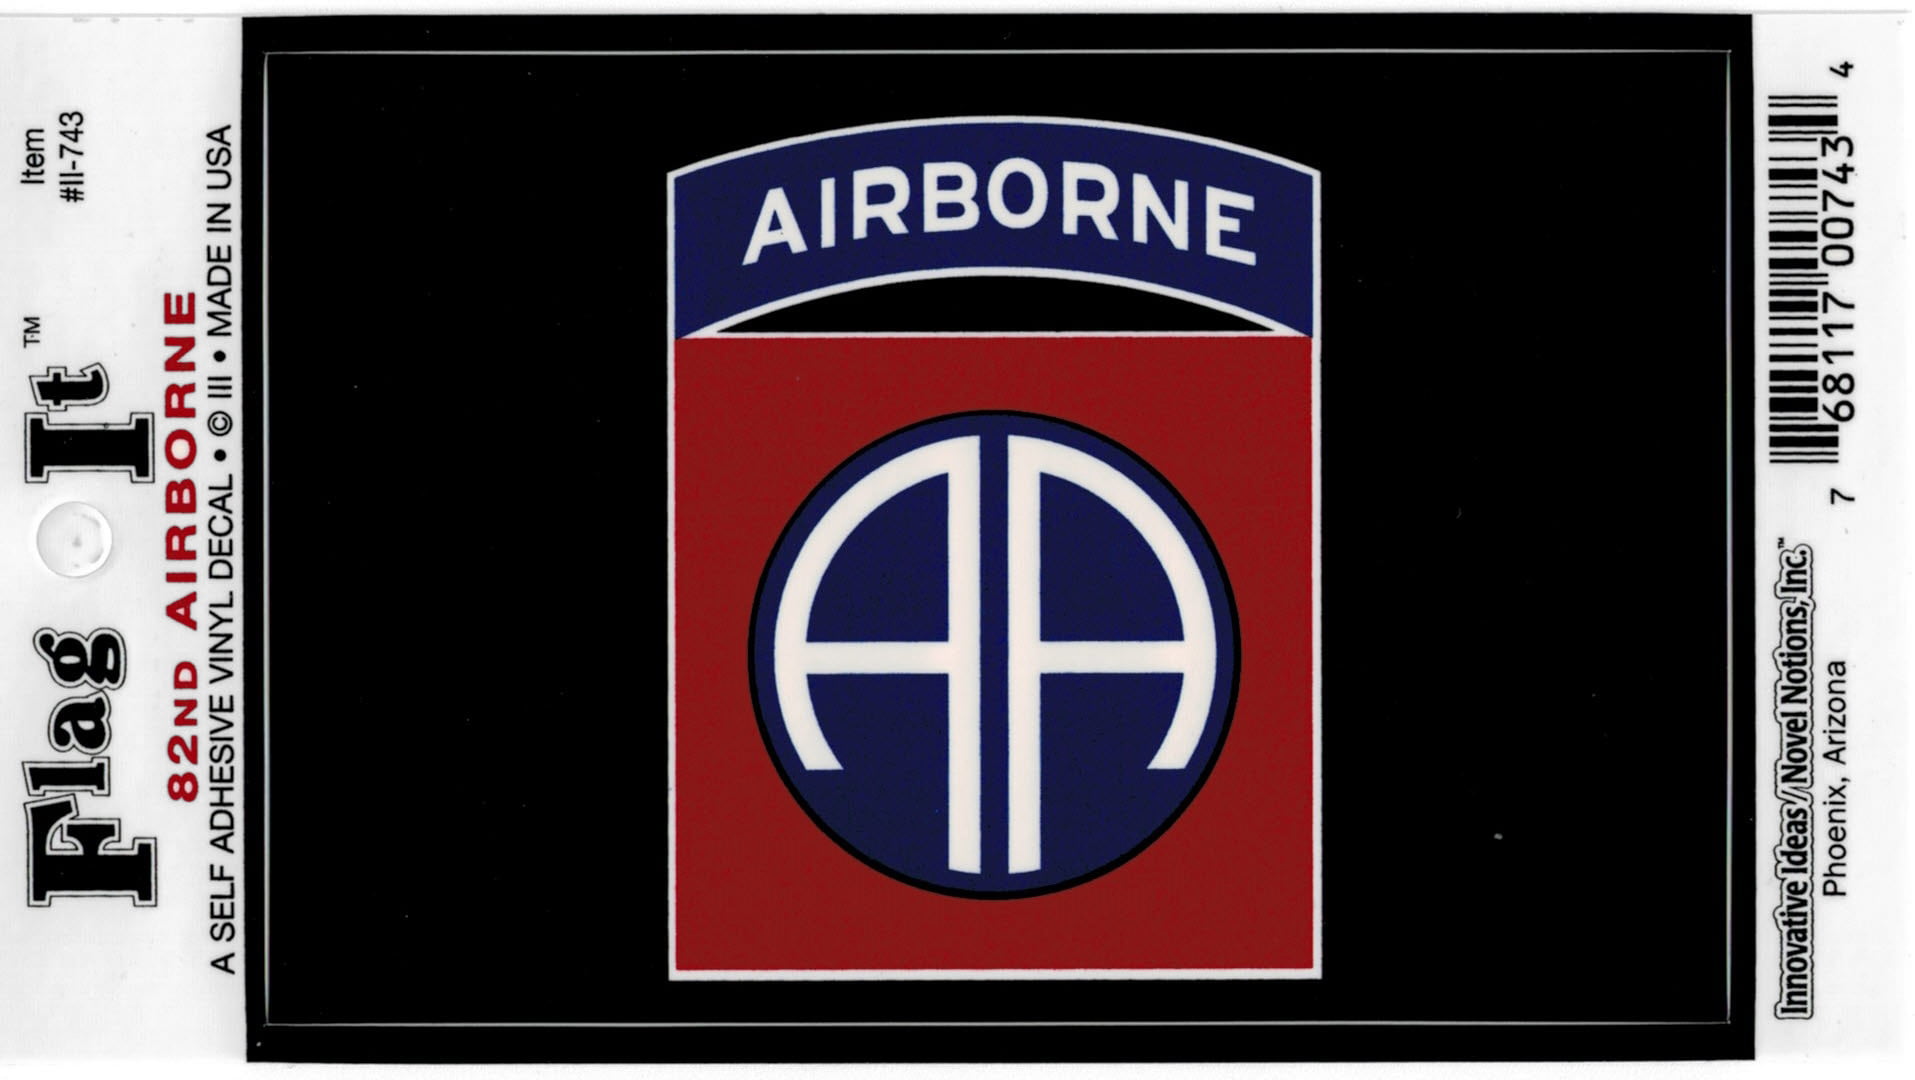 82nd Airborne Division Logo Car Decal Sticker Pack Of 2 Black 325